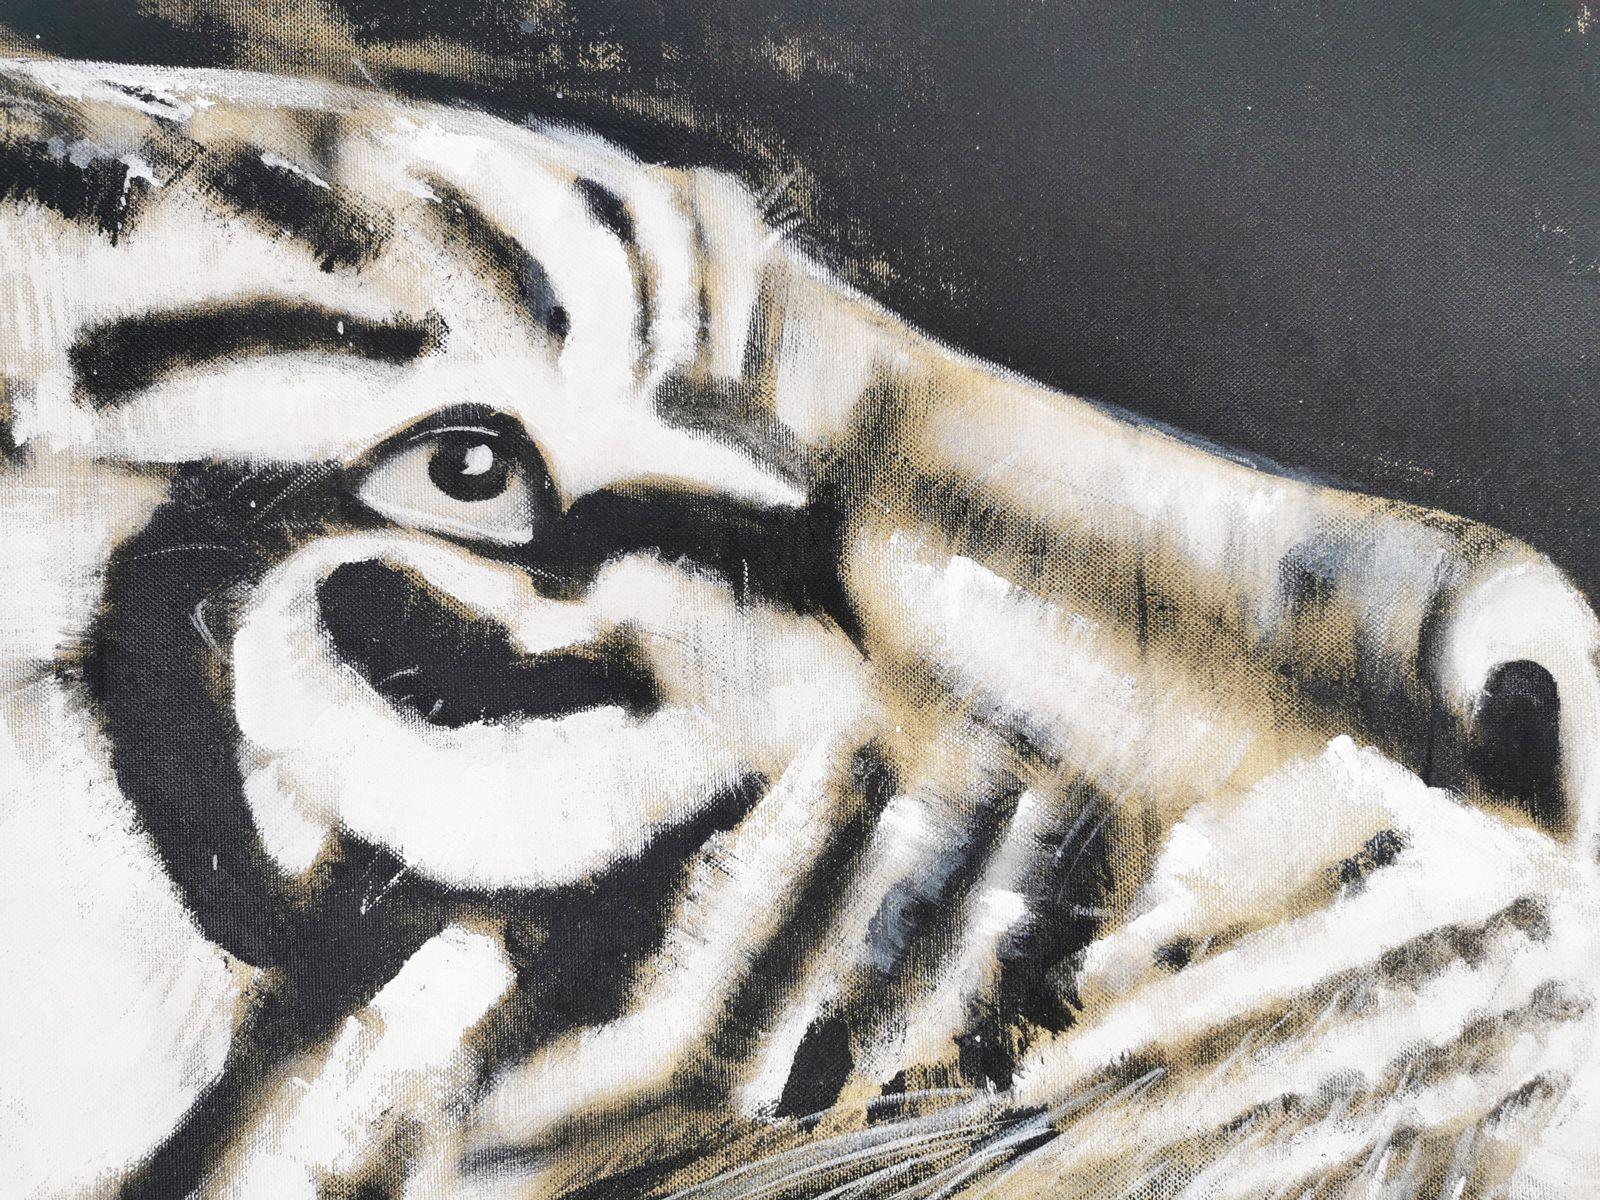 TIGER #8 is an expressive painting of a close up Tiger head.    Splashing Colors in black and white on raw canvas.  The monochrome color with the soft tone of the canvas develops has a special charm.    100 x 100 cm      â€žThe life of the last